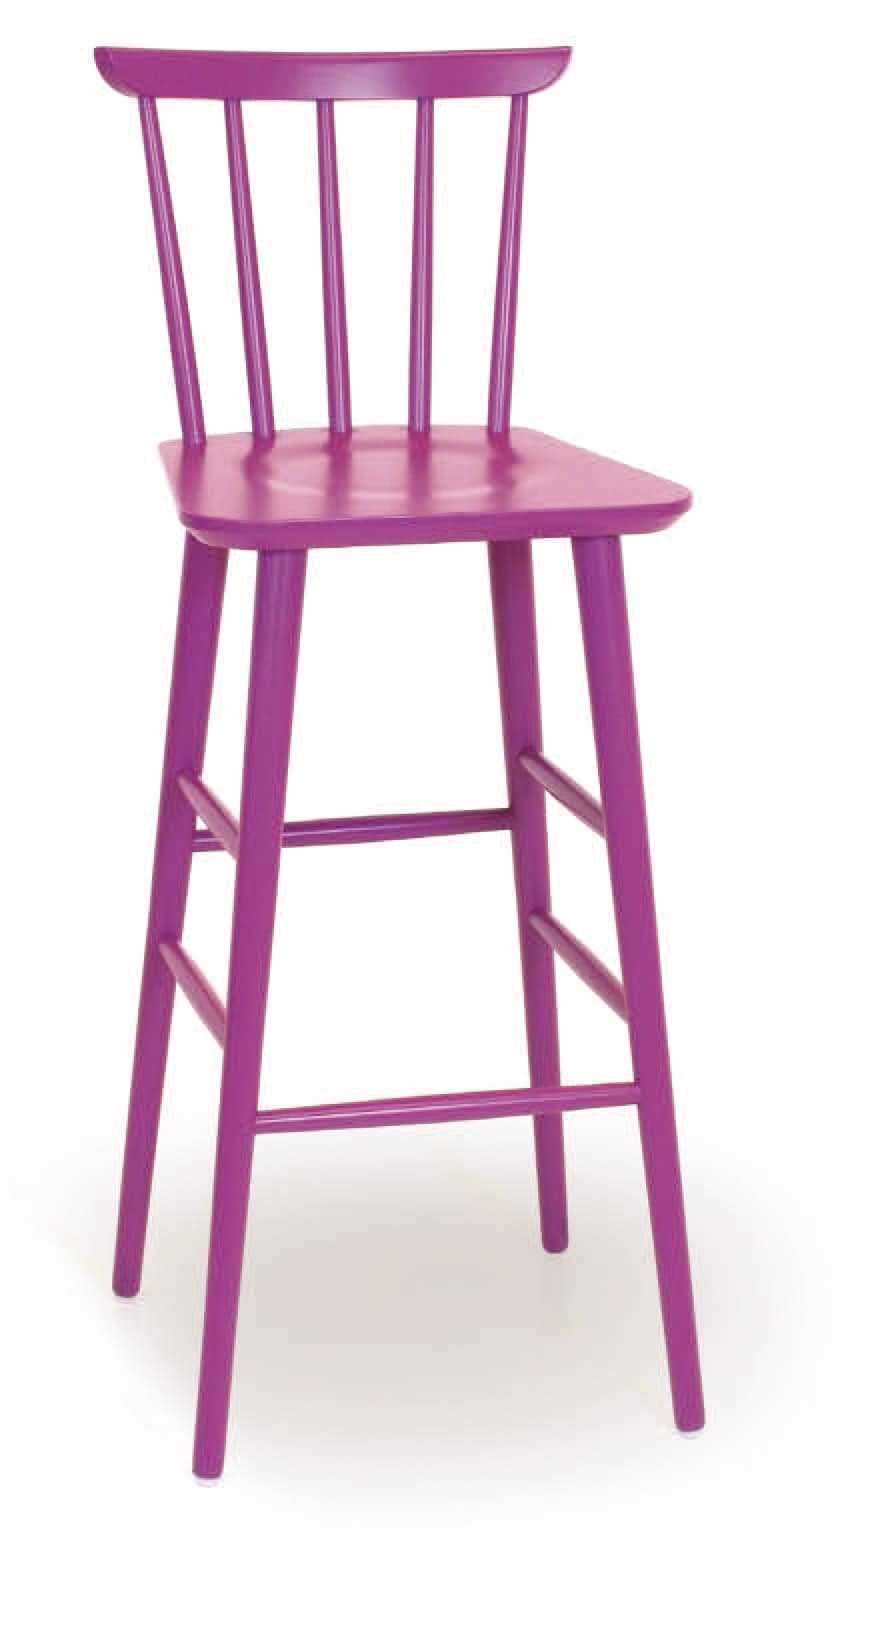 SG 200, Stool entirely of wood, in different colors